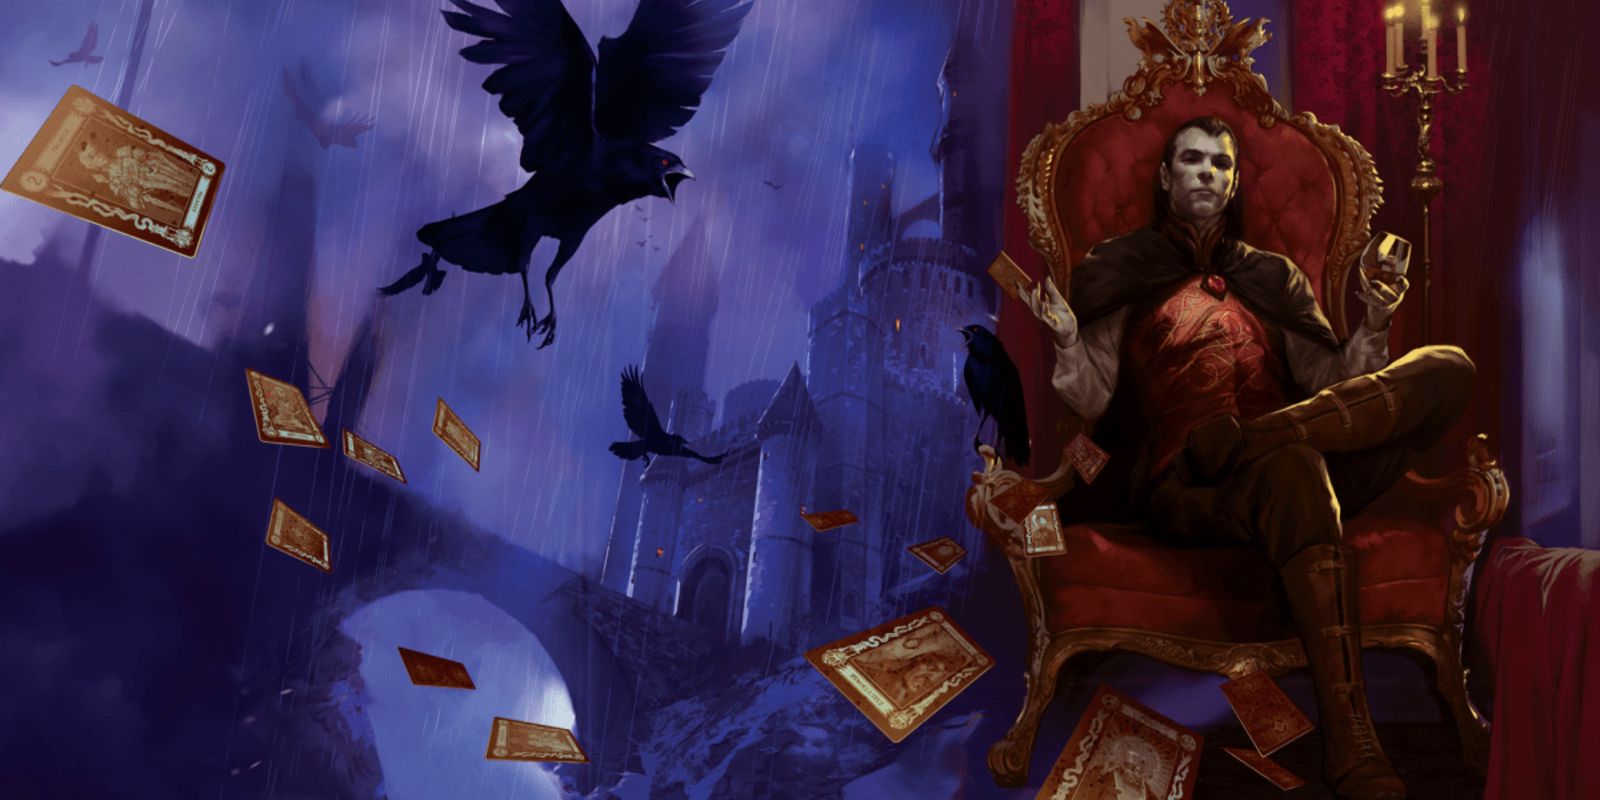 Curse of Strahd- a man sits on a red throne